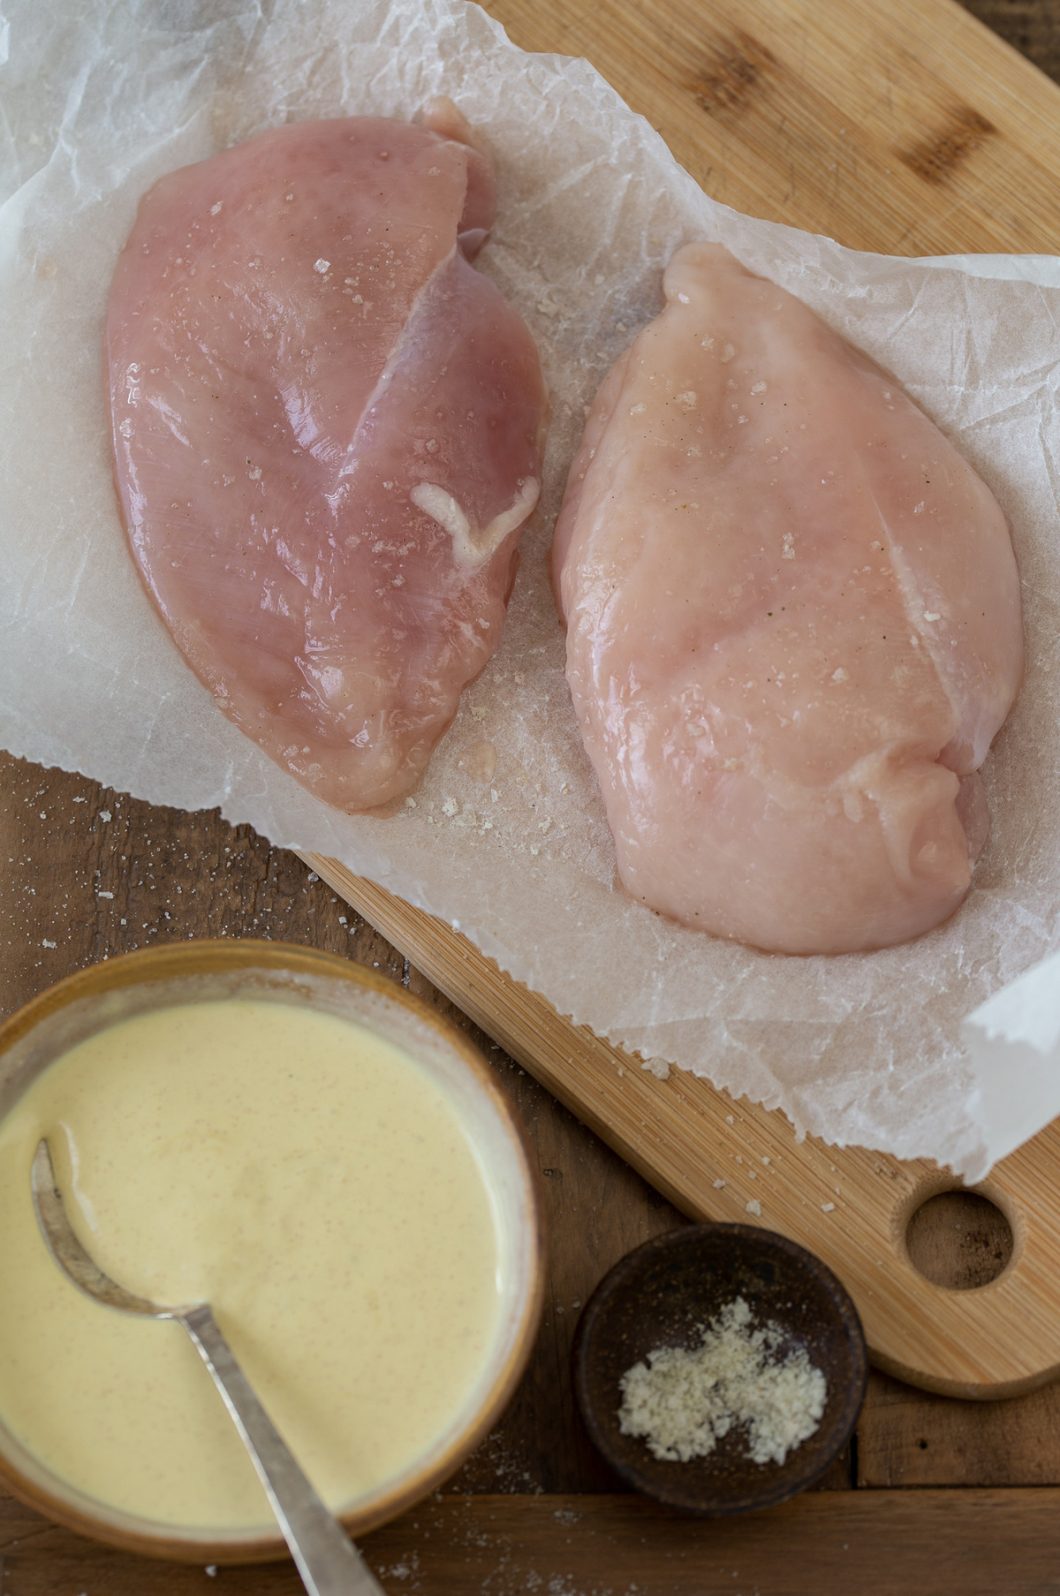 Chicken breasts on a cutting board, a bowl with the condiment on the side.